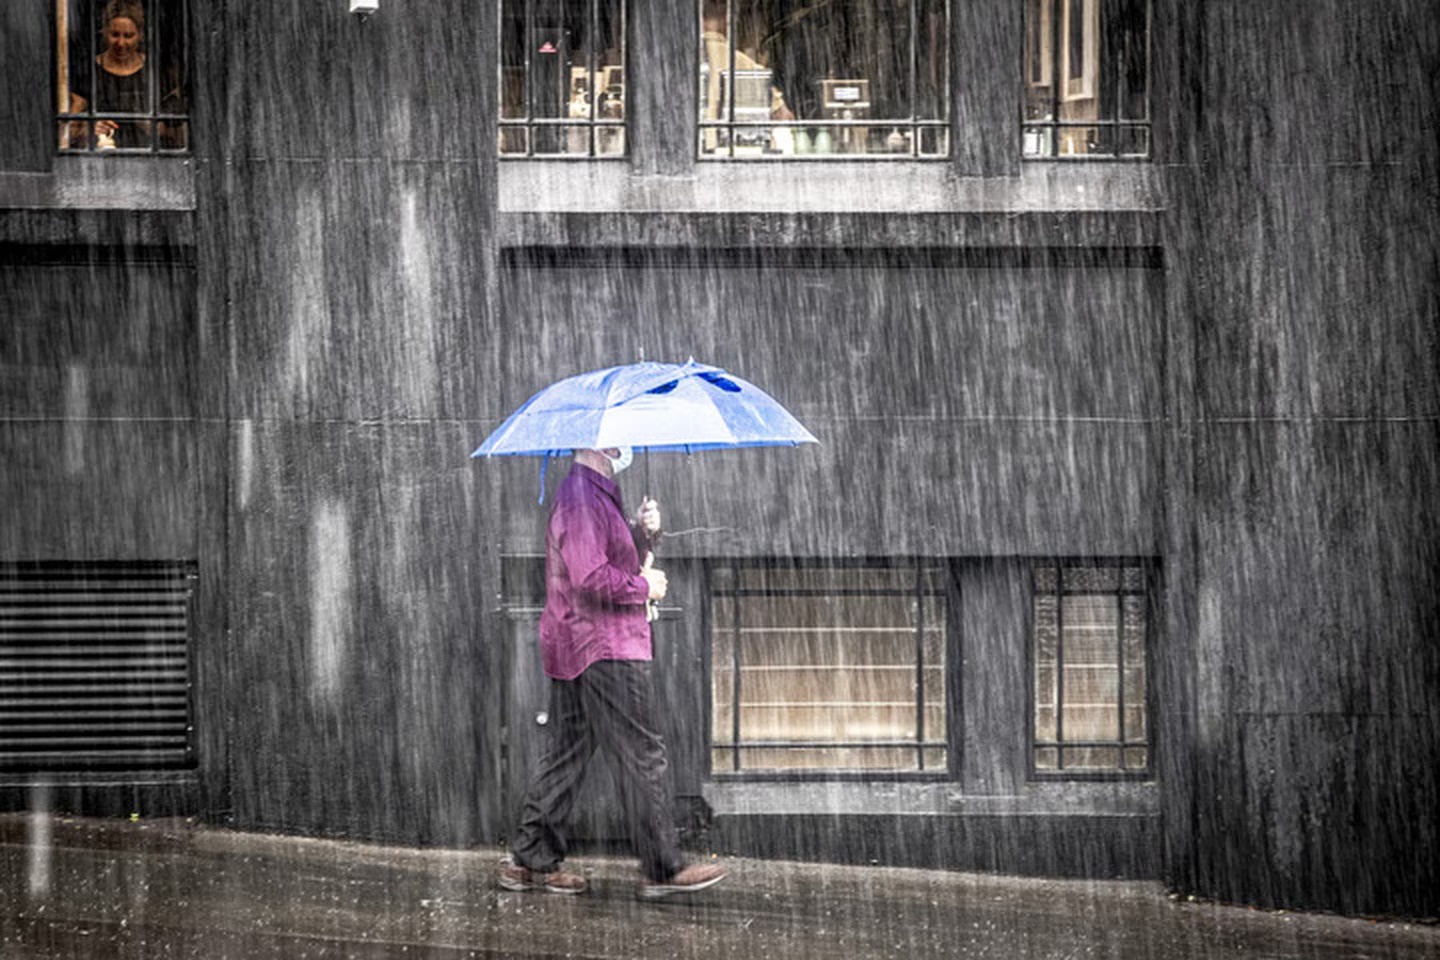 Aucklanders warned of more heavy rain possible tonight ahead of second 'atmospheric river'